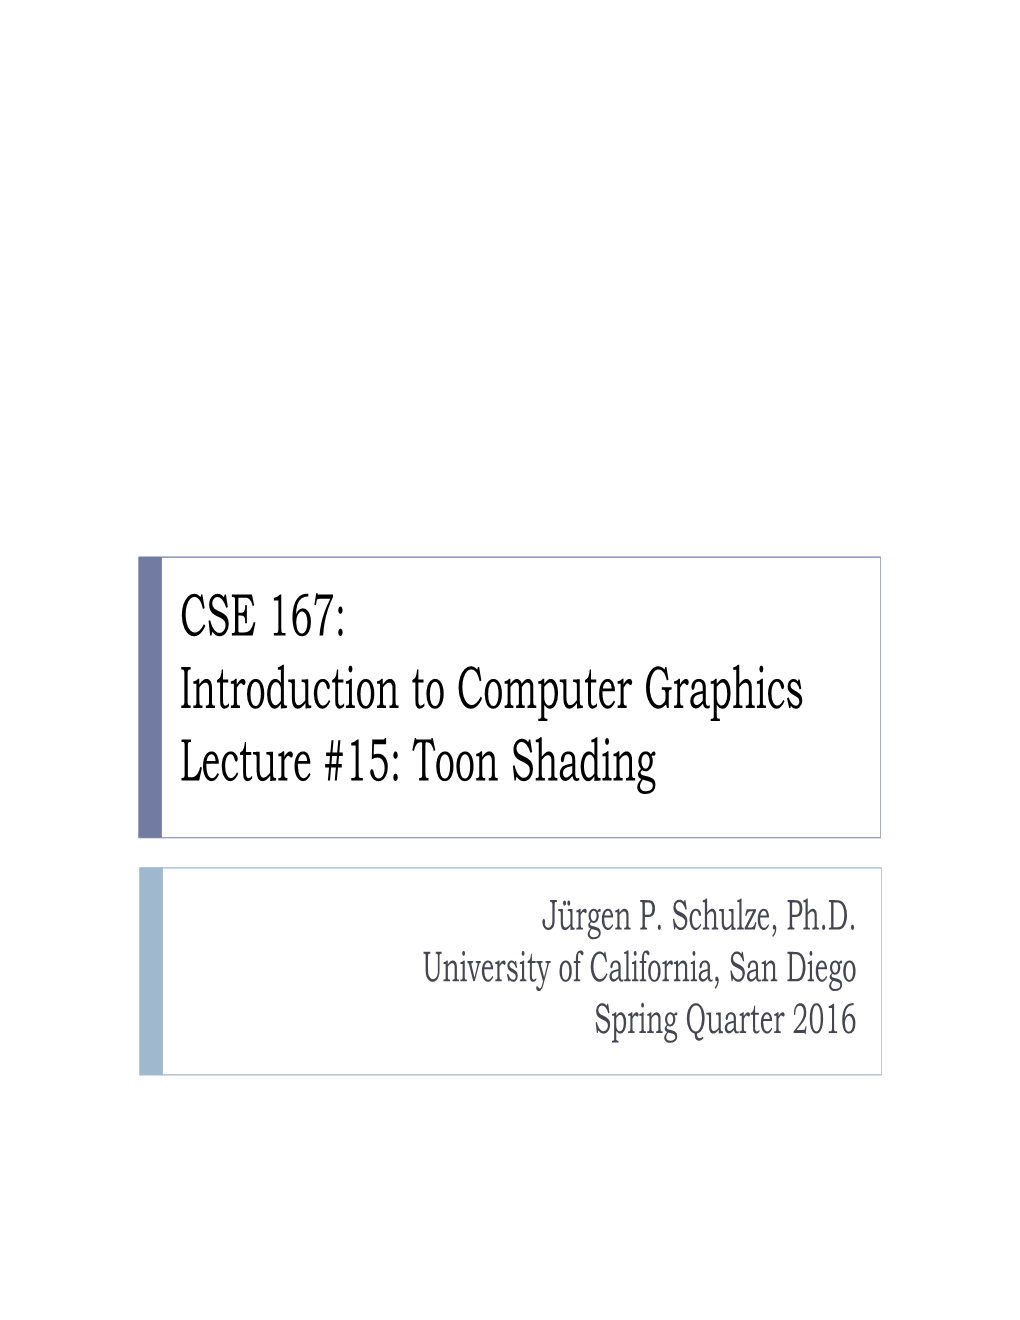 CSE 167: Introduction to Computer Graphics Lecture #15: Toon Shading